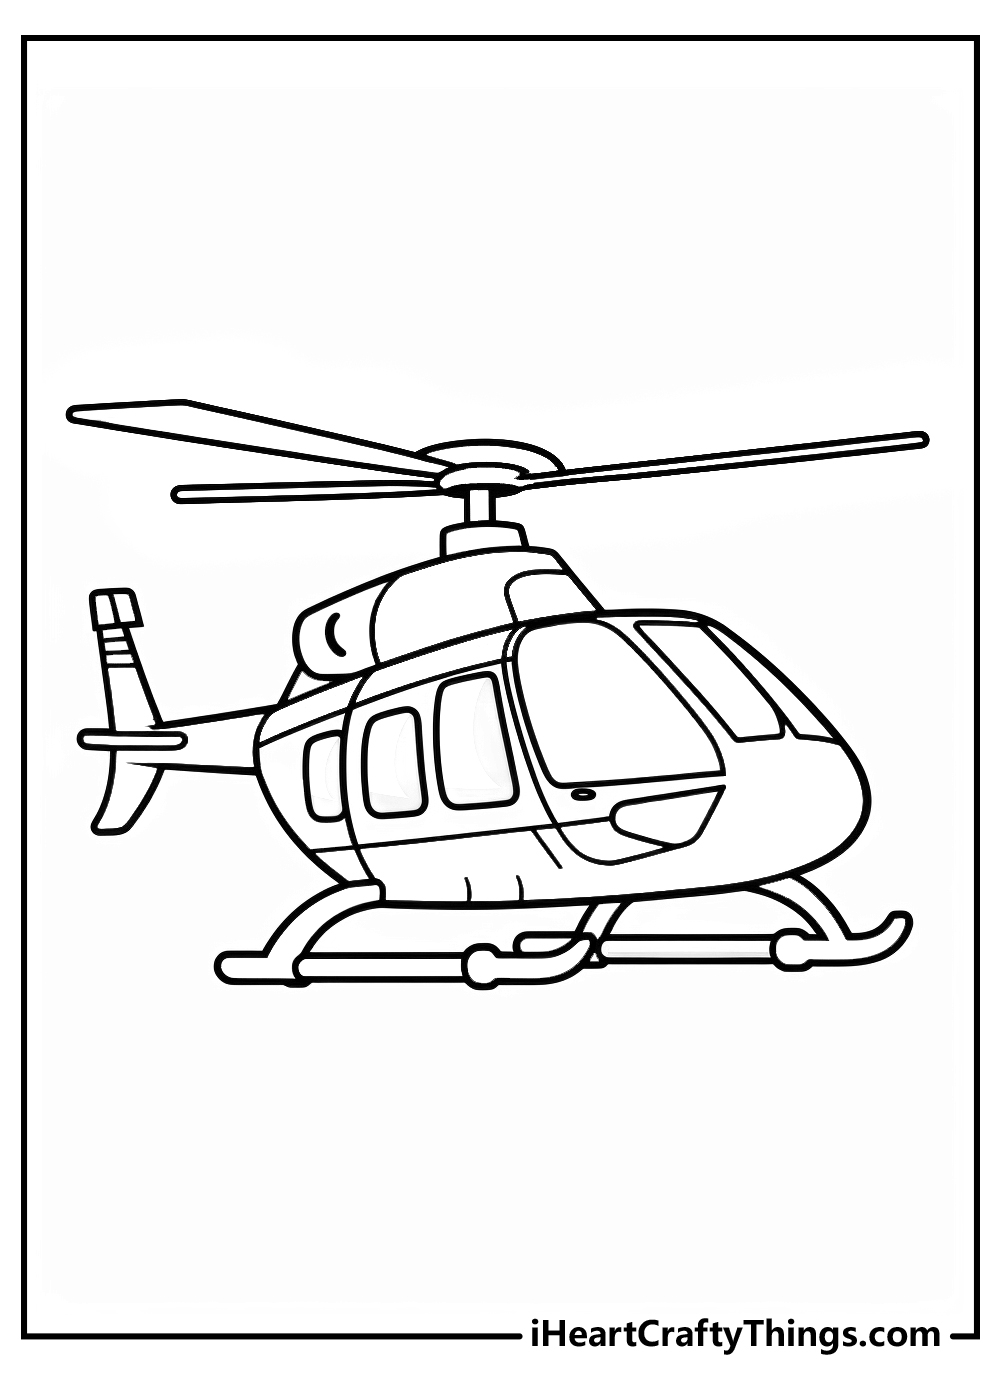 helicopter coloring sheet free pdf download